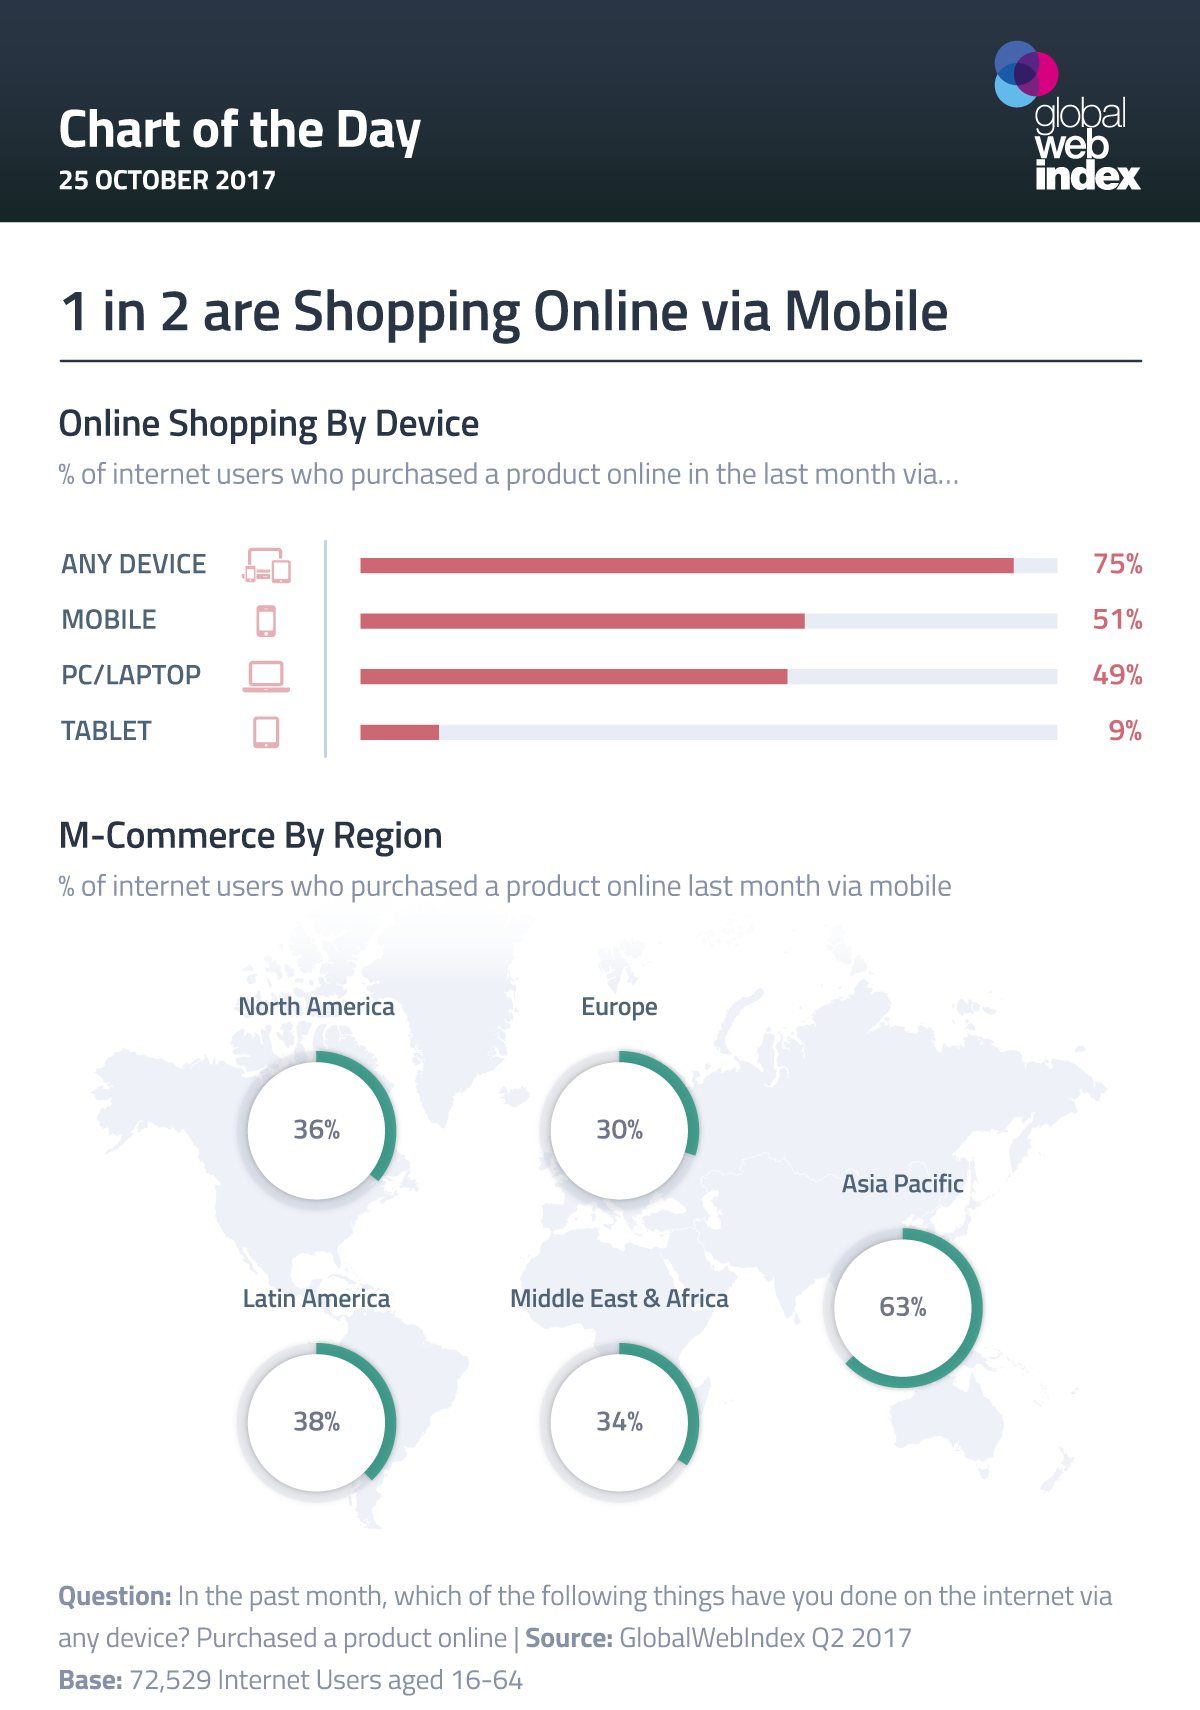 Buying Online is Now Mobile-First